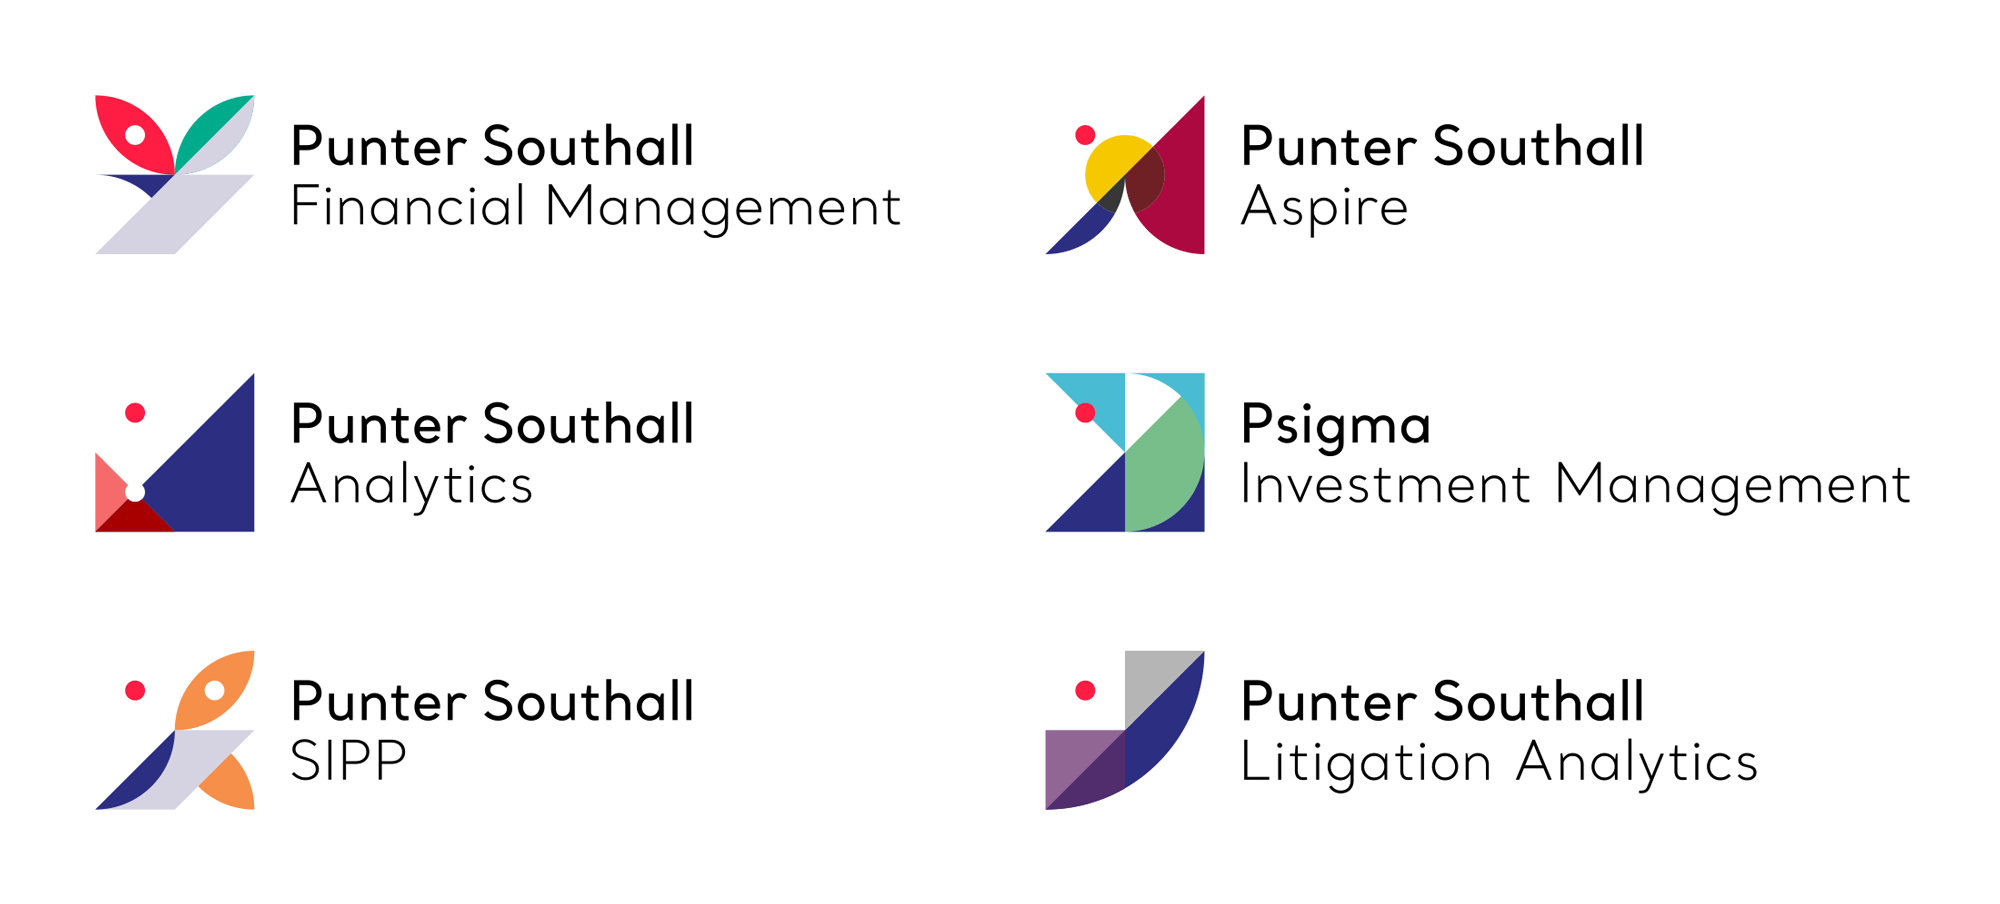 New Logo and Identity for Punter Southall Group by Future Kings